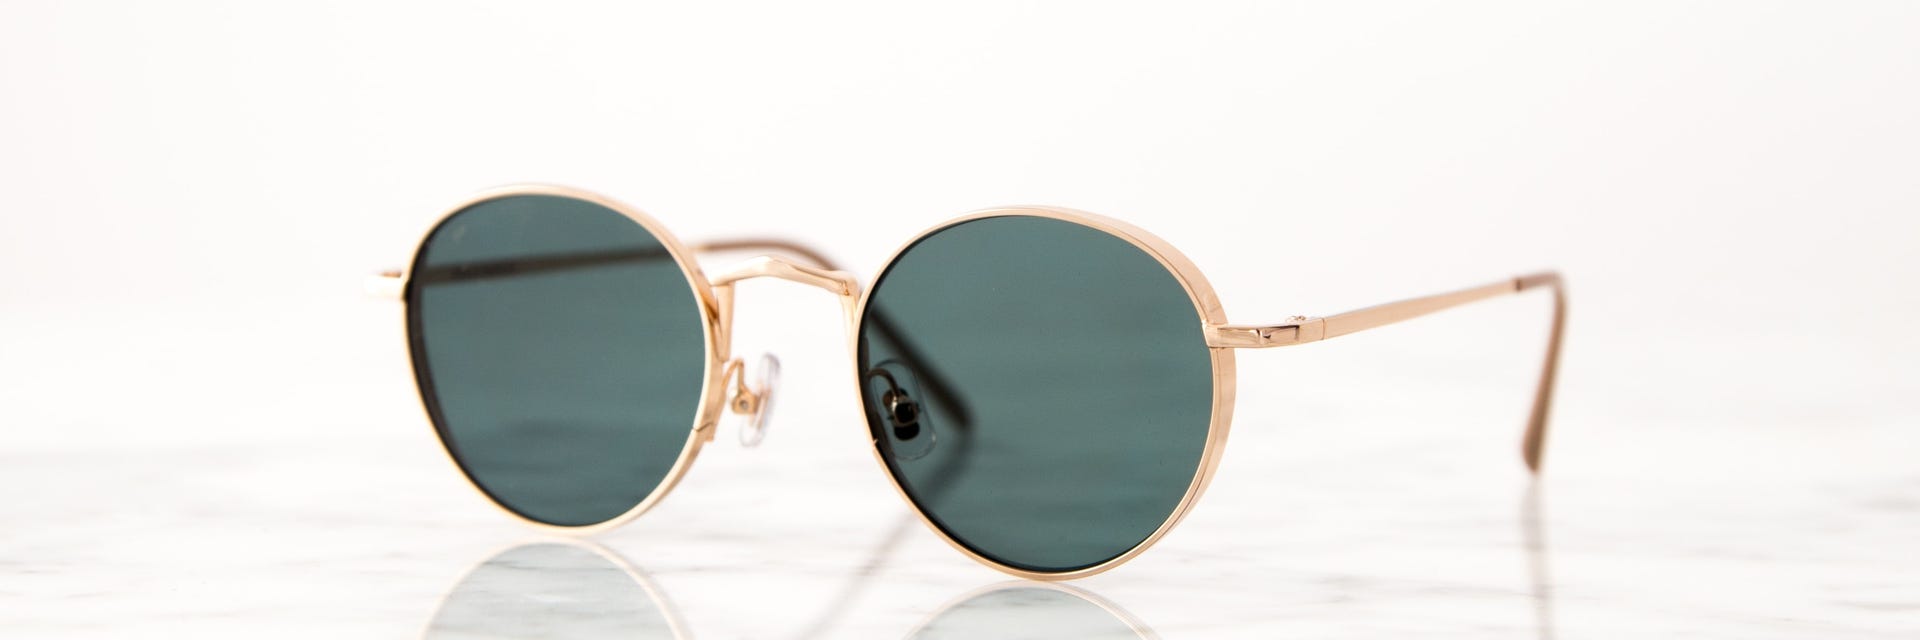 vintage sunglasses with dark lenses and gold frame